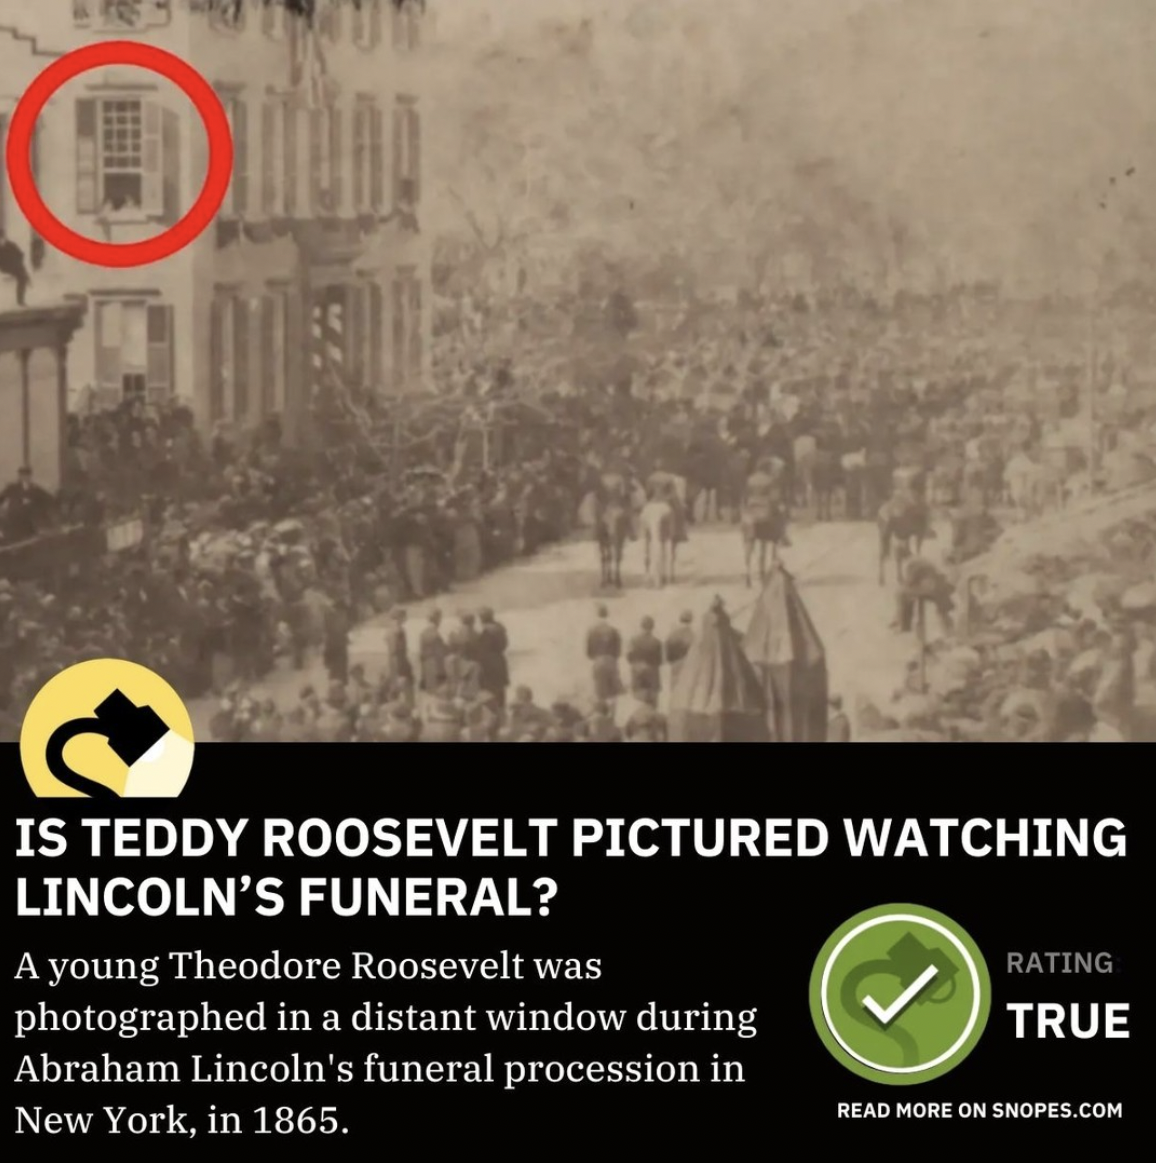 Snopes Facts - teddy roosevelt lincoln funeral procession - Is Teddy Roosevelt Pictured Watching Lincoln'S Funeral? A young Theodore Roosevelt was Rating photographed in a distant window during True Abraham Lincoln's funeral procession in New York, in 186